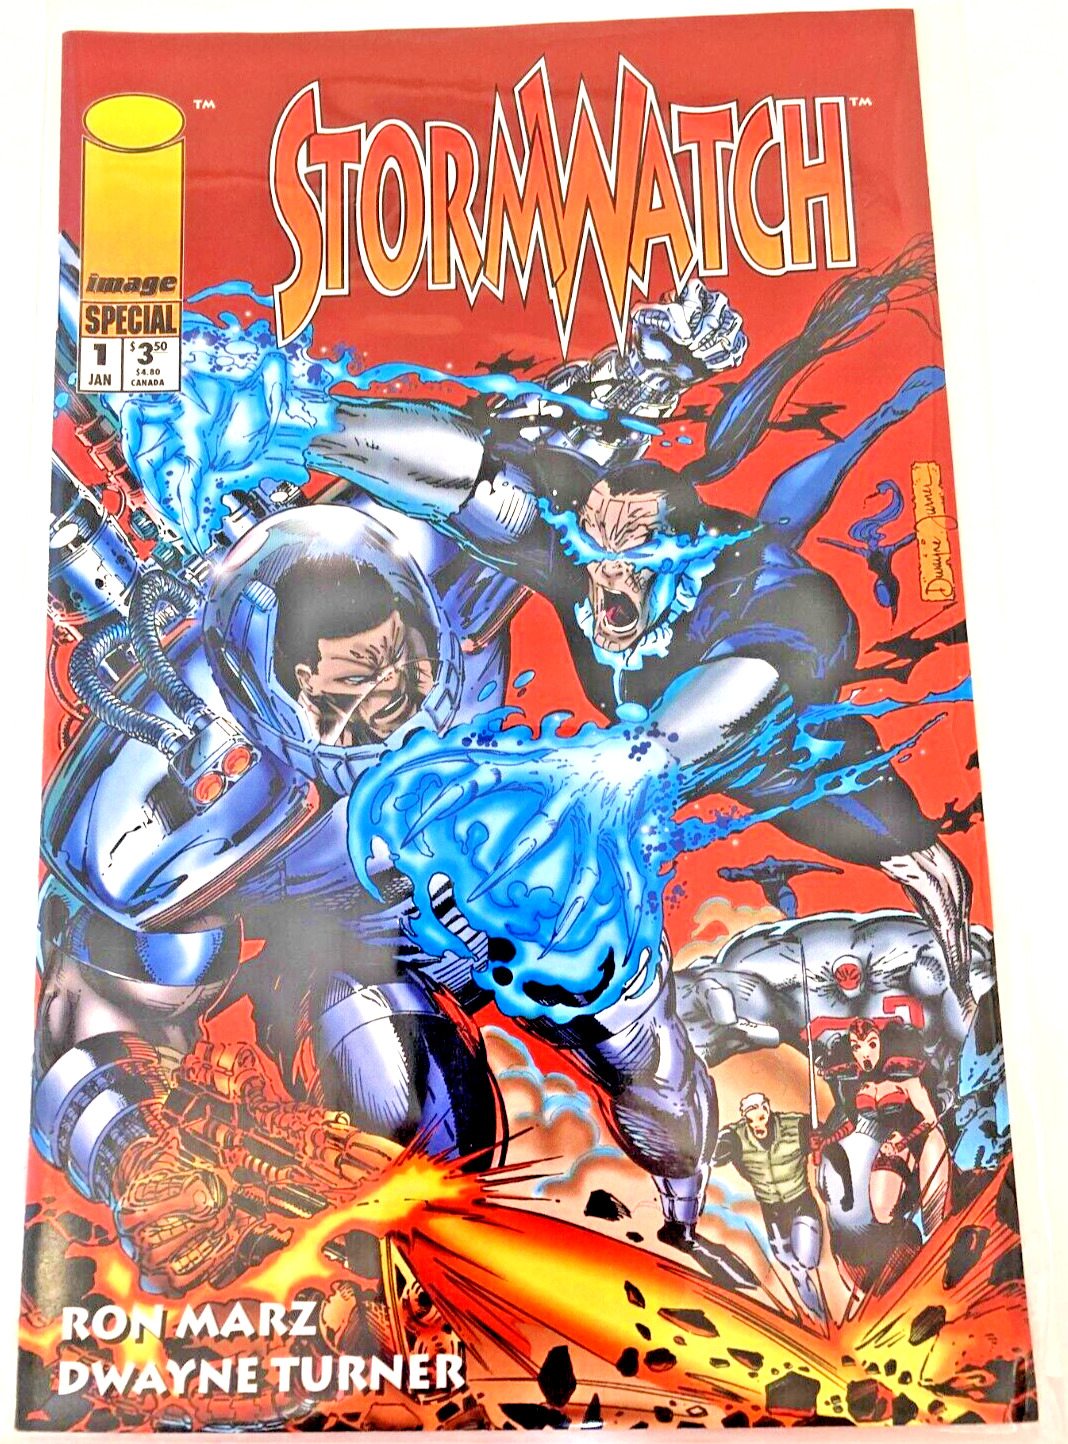 Stormwatch Special #1 (Jan 1994, Image)